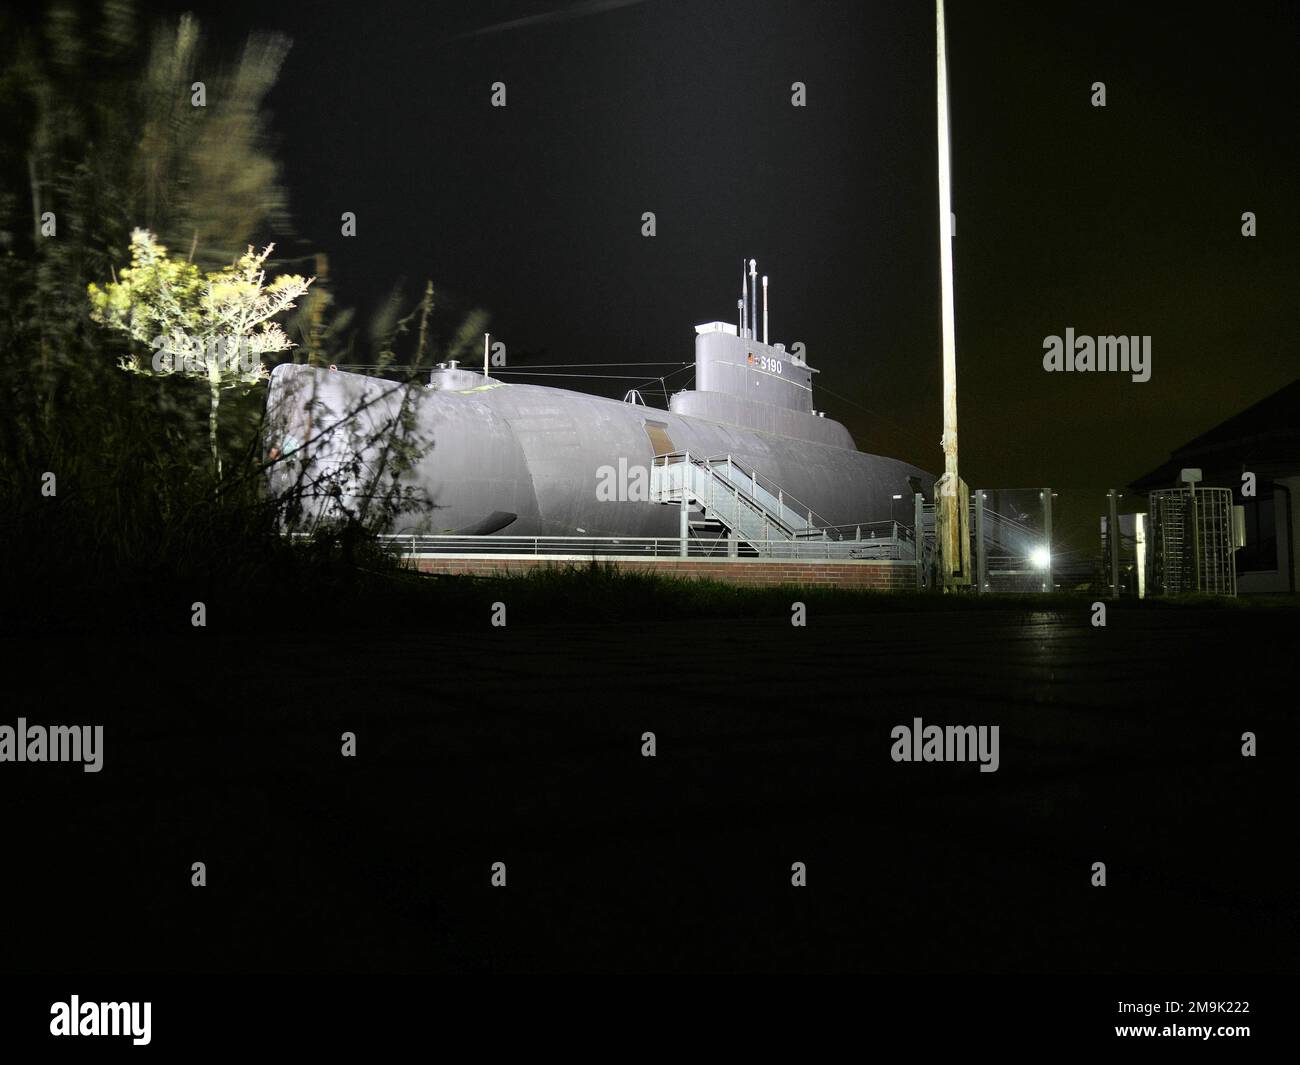 Oblique view of an old submarine as a museum in Burg auf Fehmarn Germany at night Stock Photo